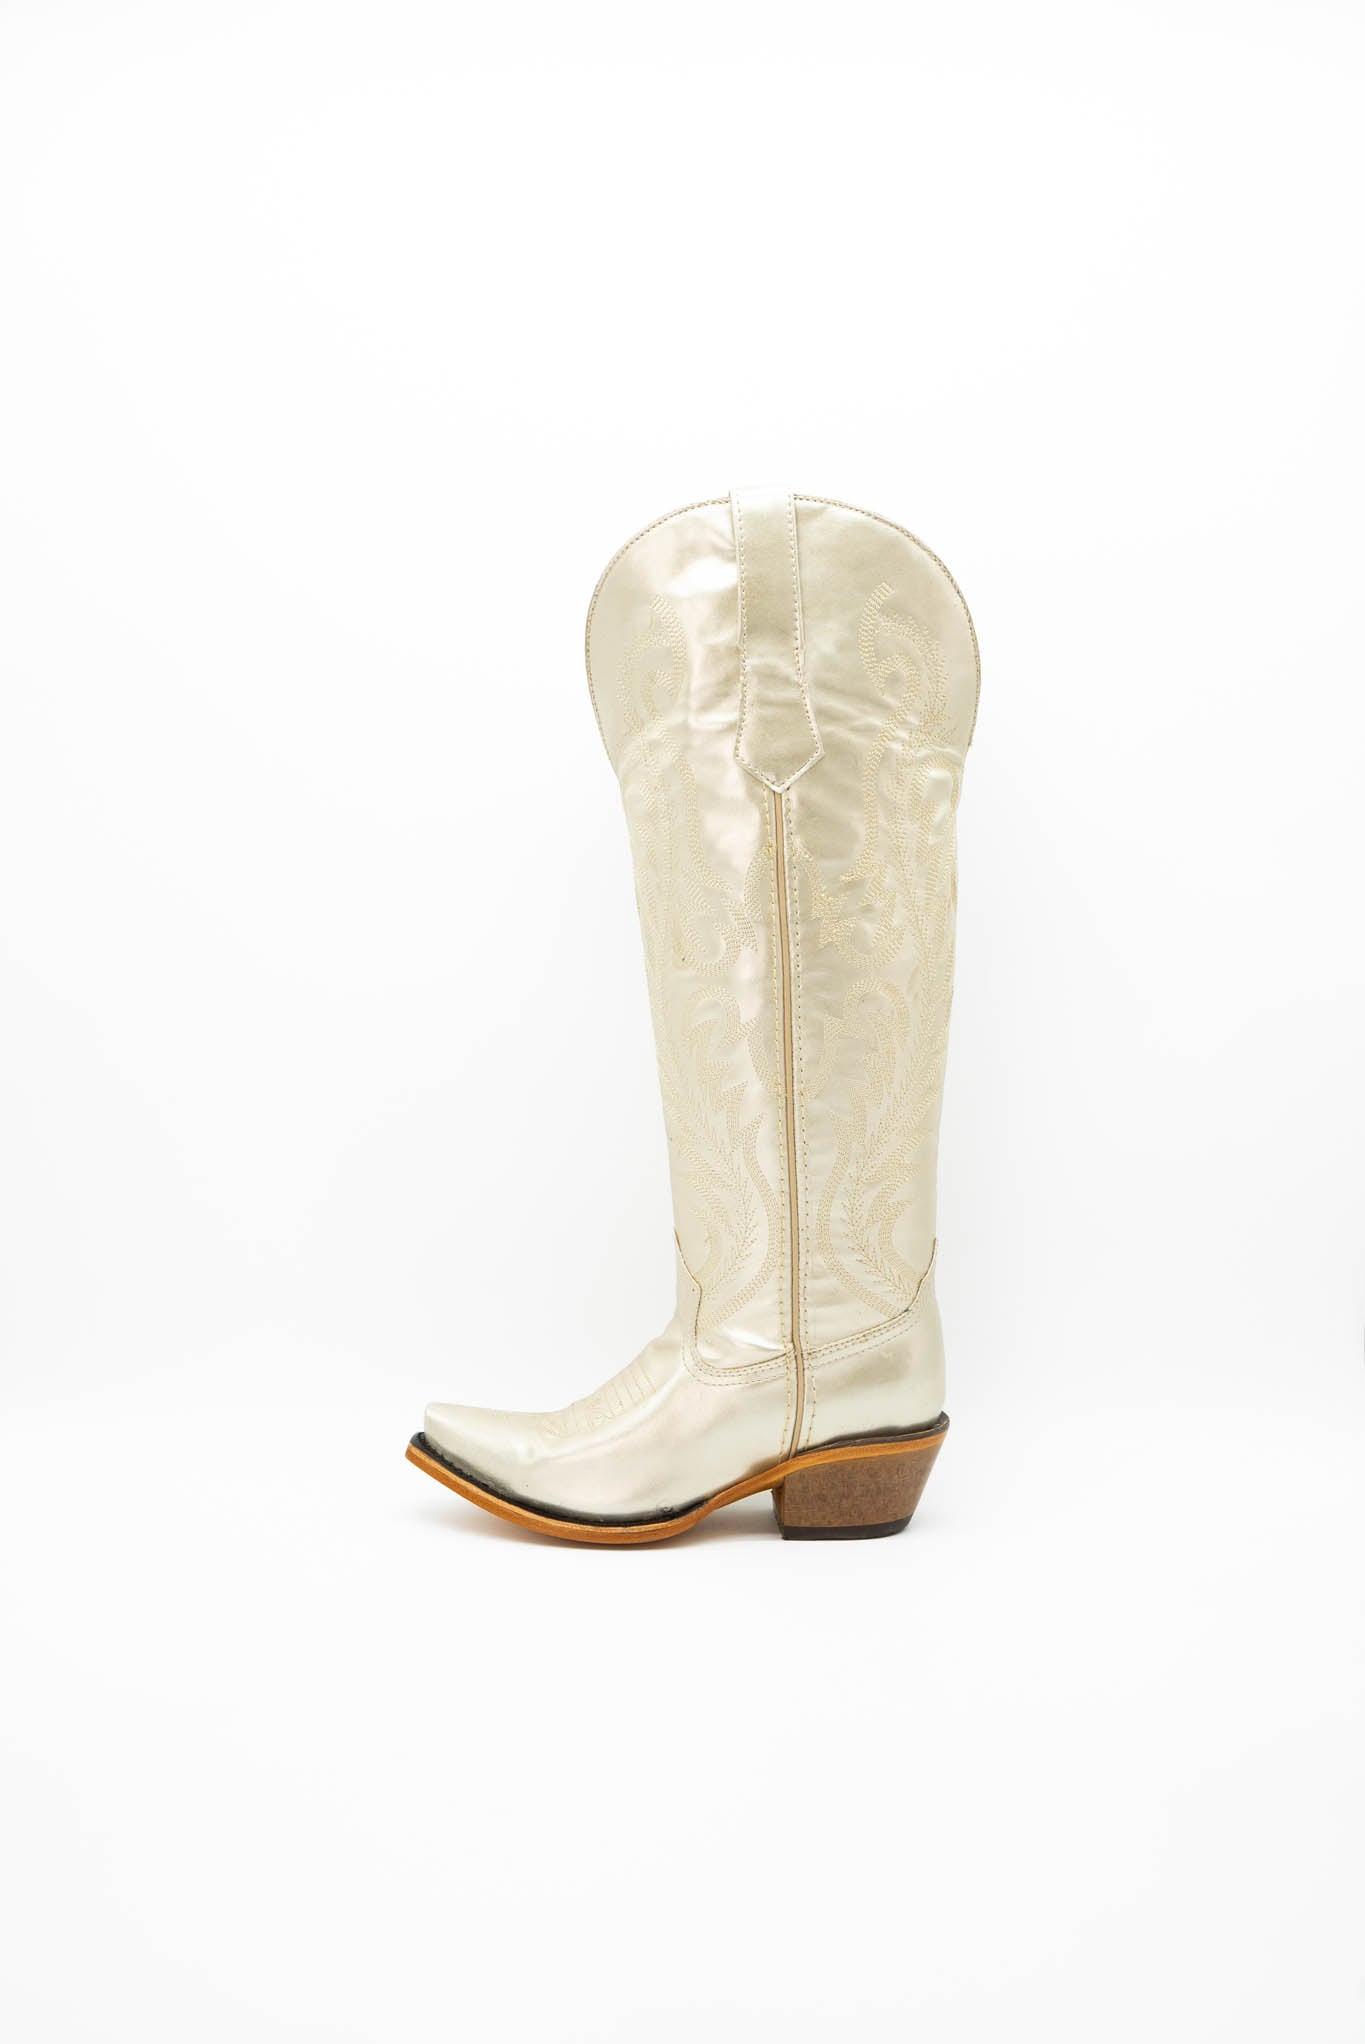 Gianna Textil Oro Metallic Wide Calf Friendly Tall Point Toe Cowgirl Boot